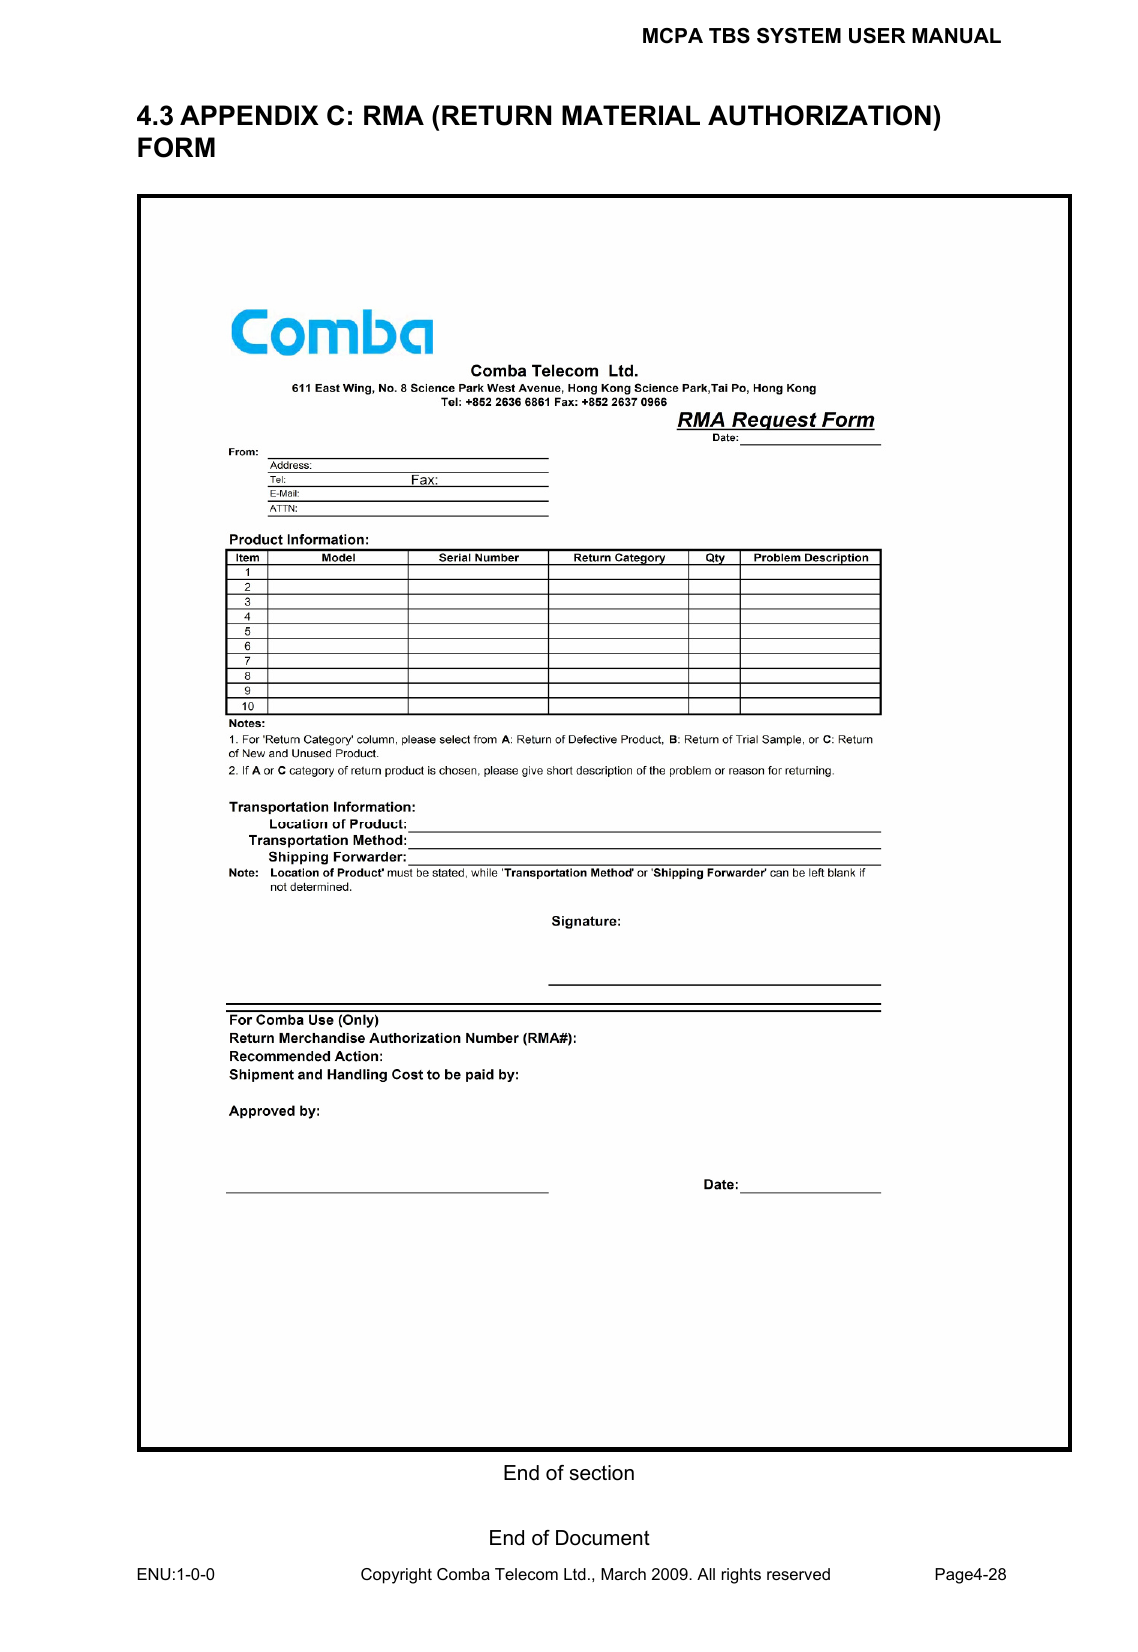 MCPA TBS SYSTEM USER MANUAL ENU:1-0-0 Copyright Comba Telecom Ltd., March 2009. All rights reserved  Page4-28    4.3 APPENDIX C: RMA (RETURN MATERIAL AUTHORIZATION) FORM  End of section  End of Document 